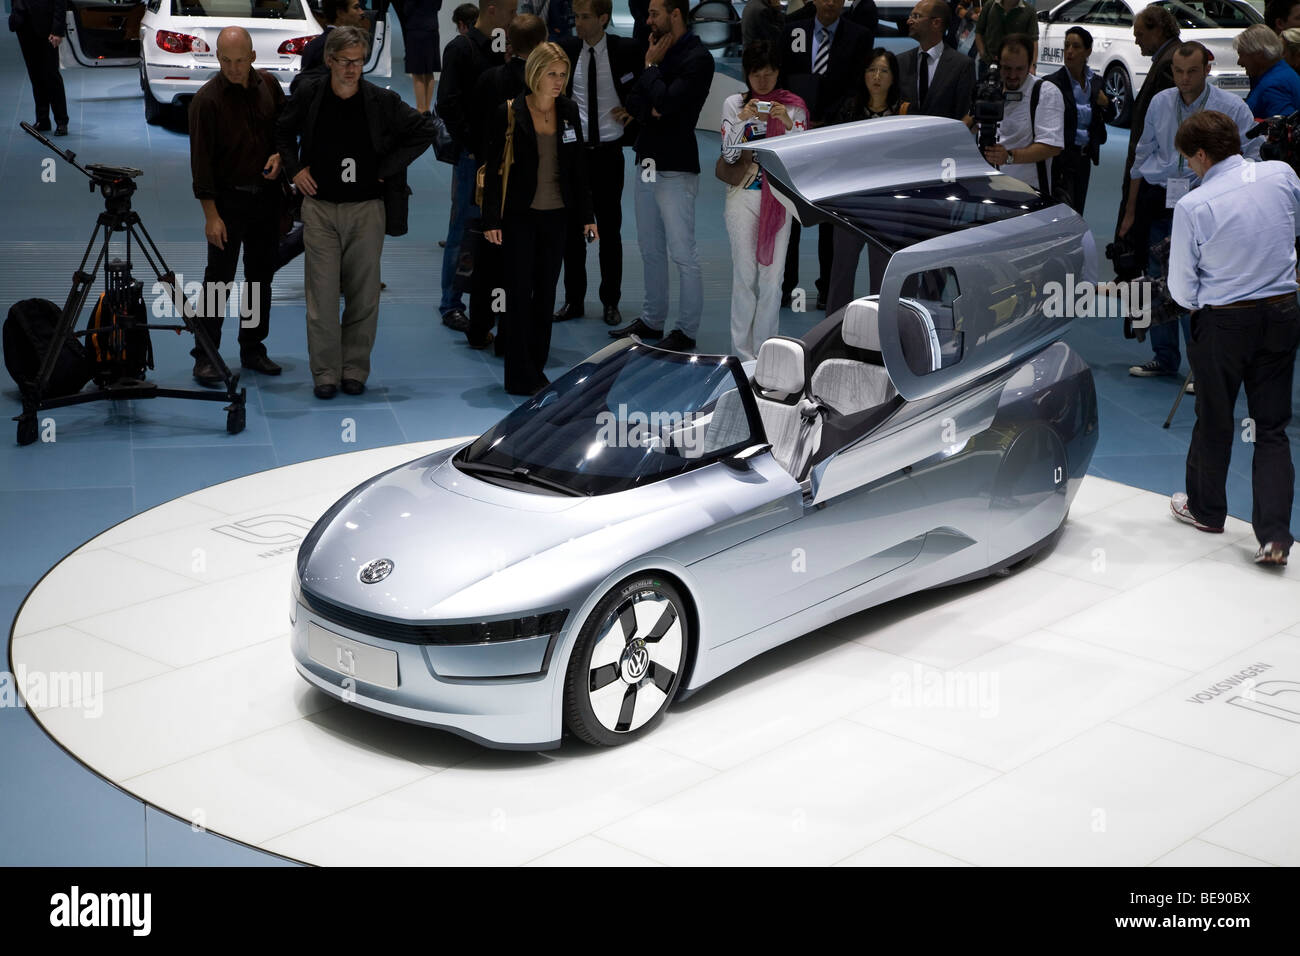 Volkswagen 170 mpg tandem diesel hybrid two-seater L1. At a European motor show. Stock Photo